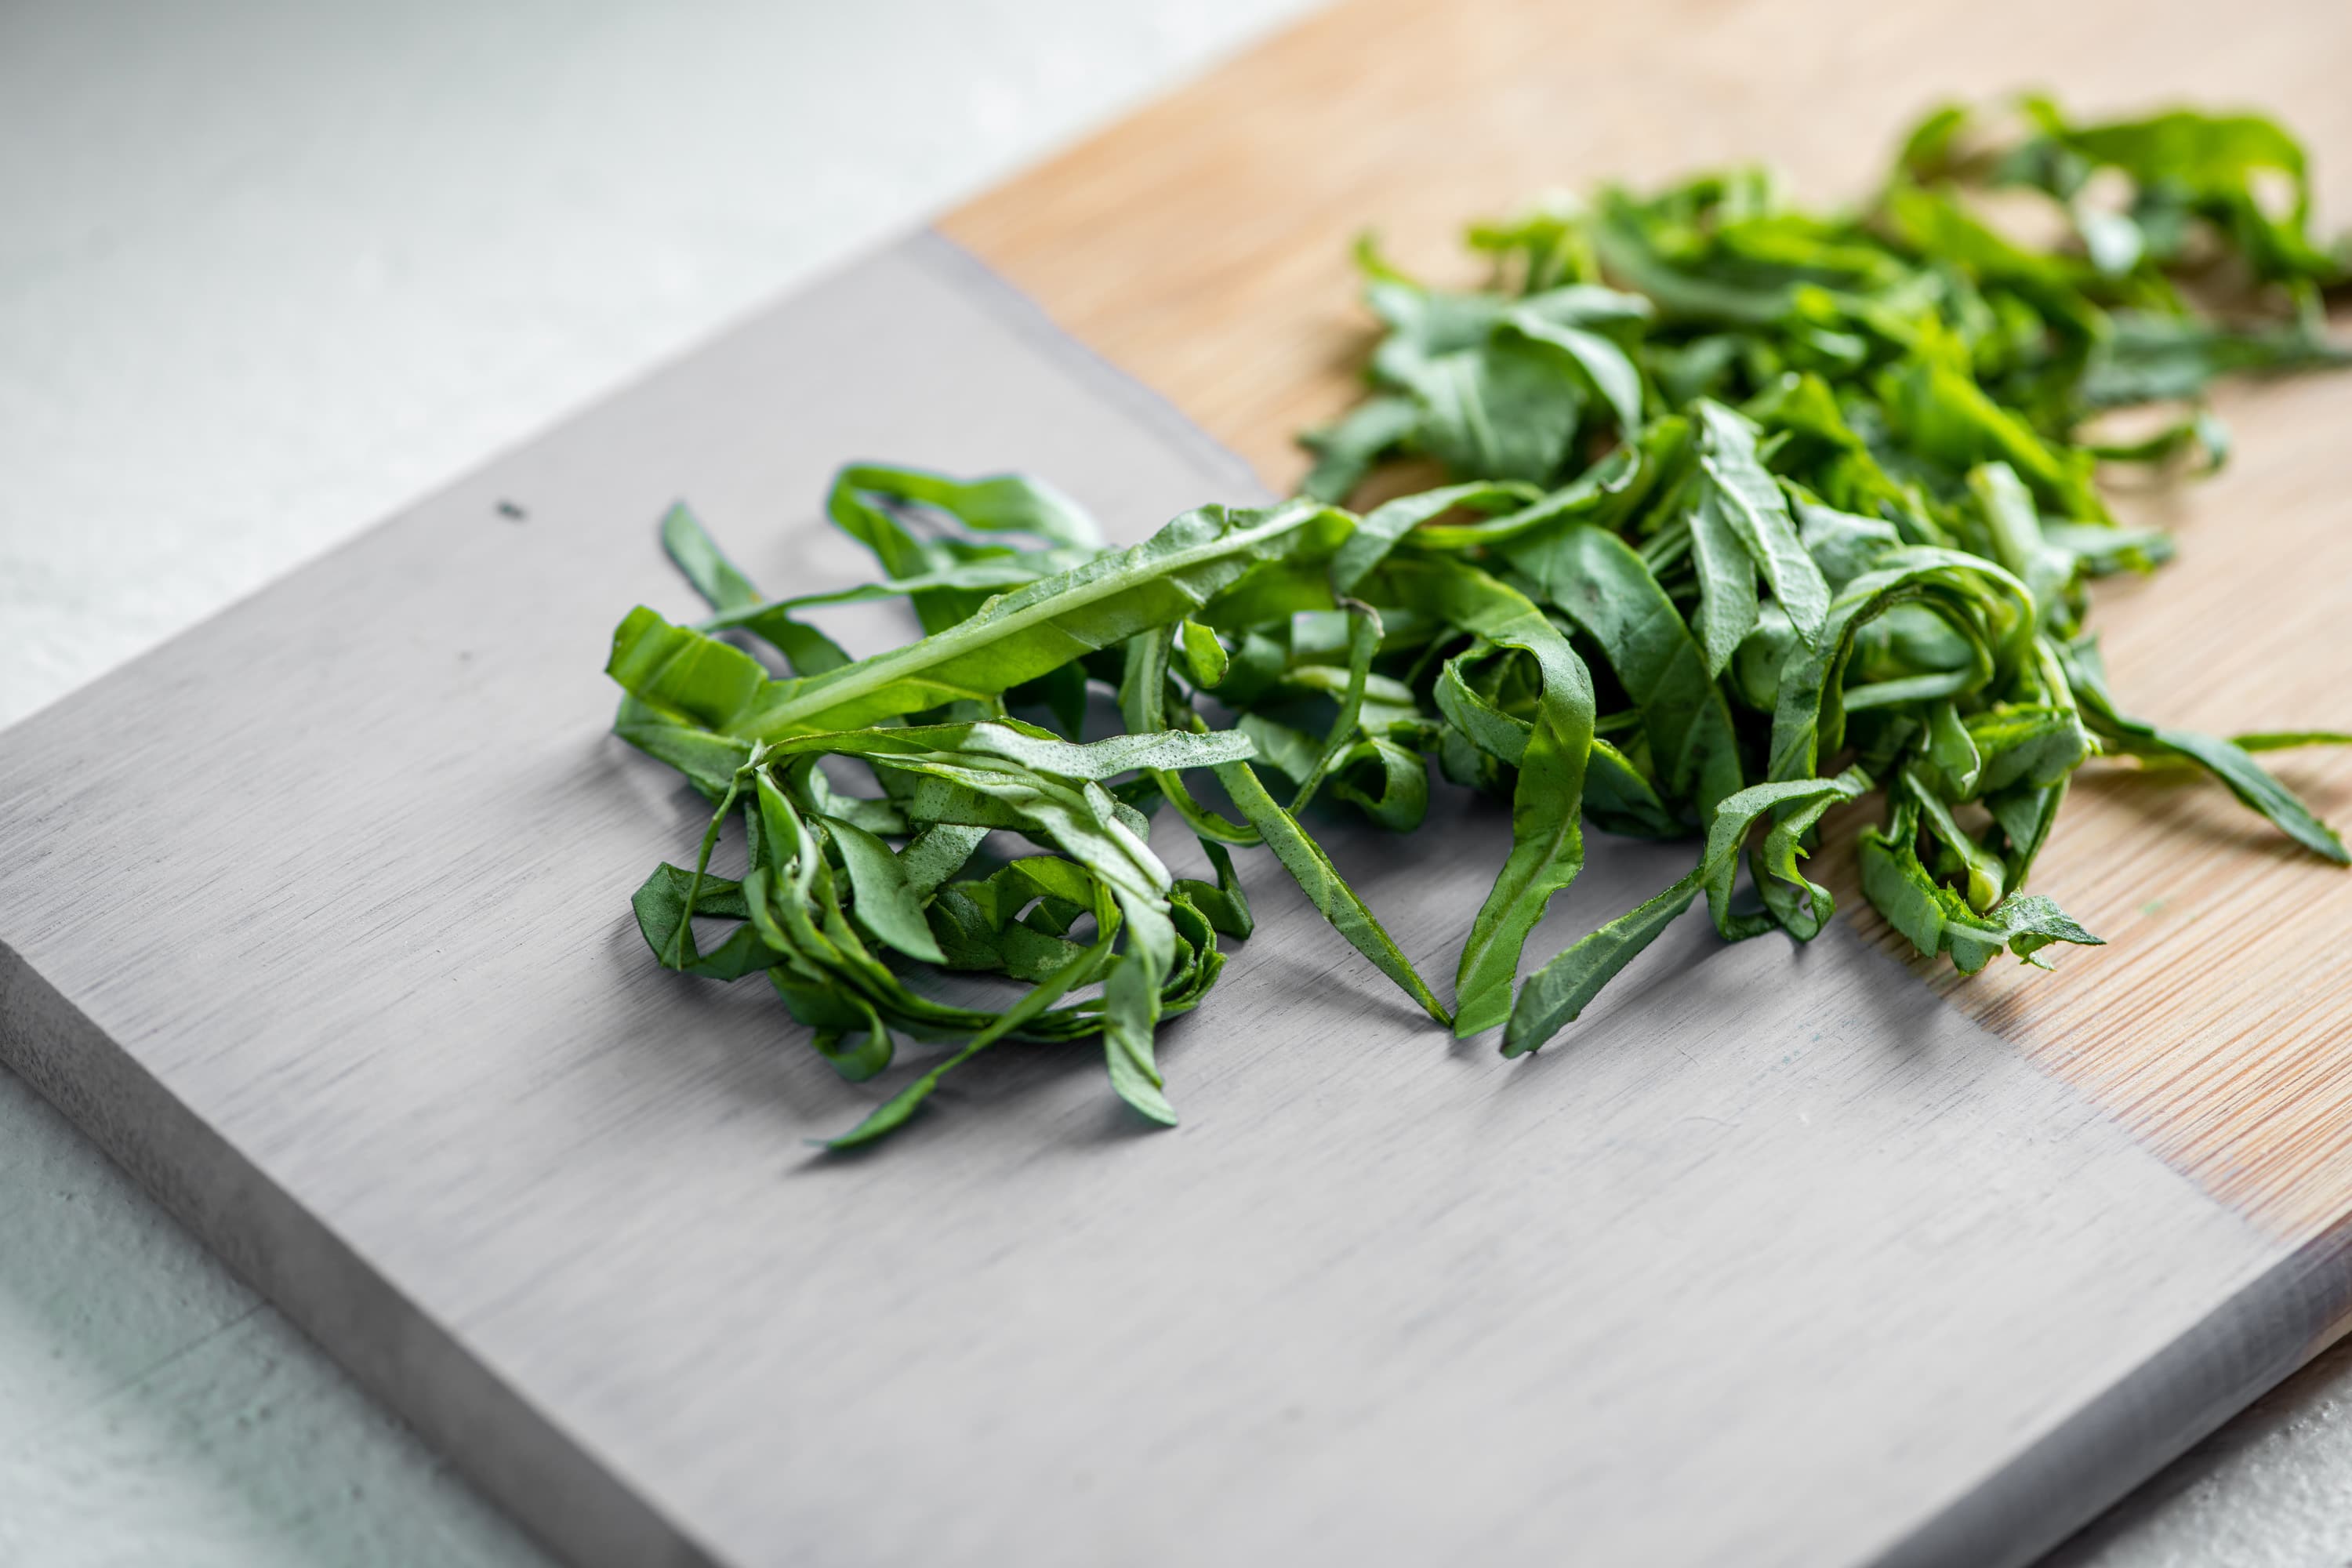 Thinly sliced or chiffonaded basil on a painted cutting baord.